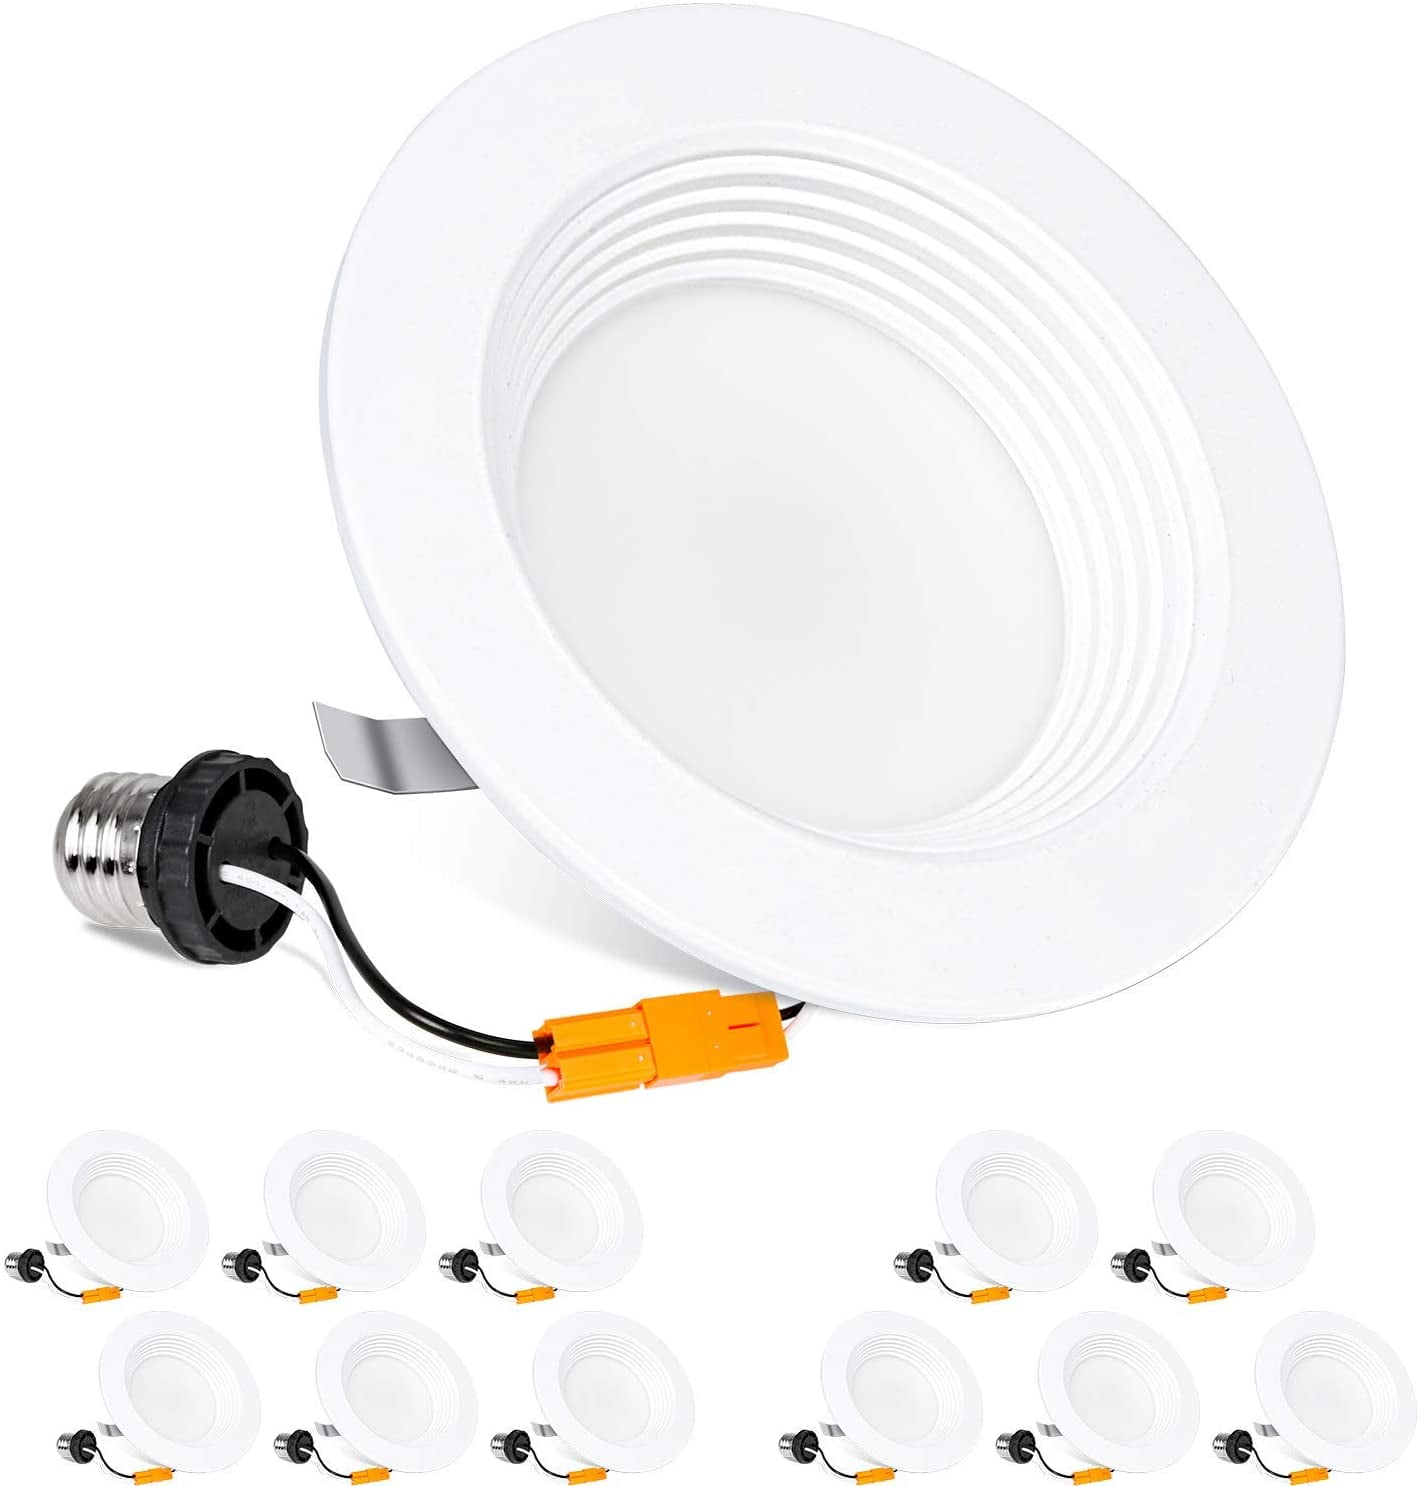 Details about   12 X Round 4 inch Trim Downlight 9W LED Recessed Dimmable LED Retrofit kit 